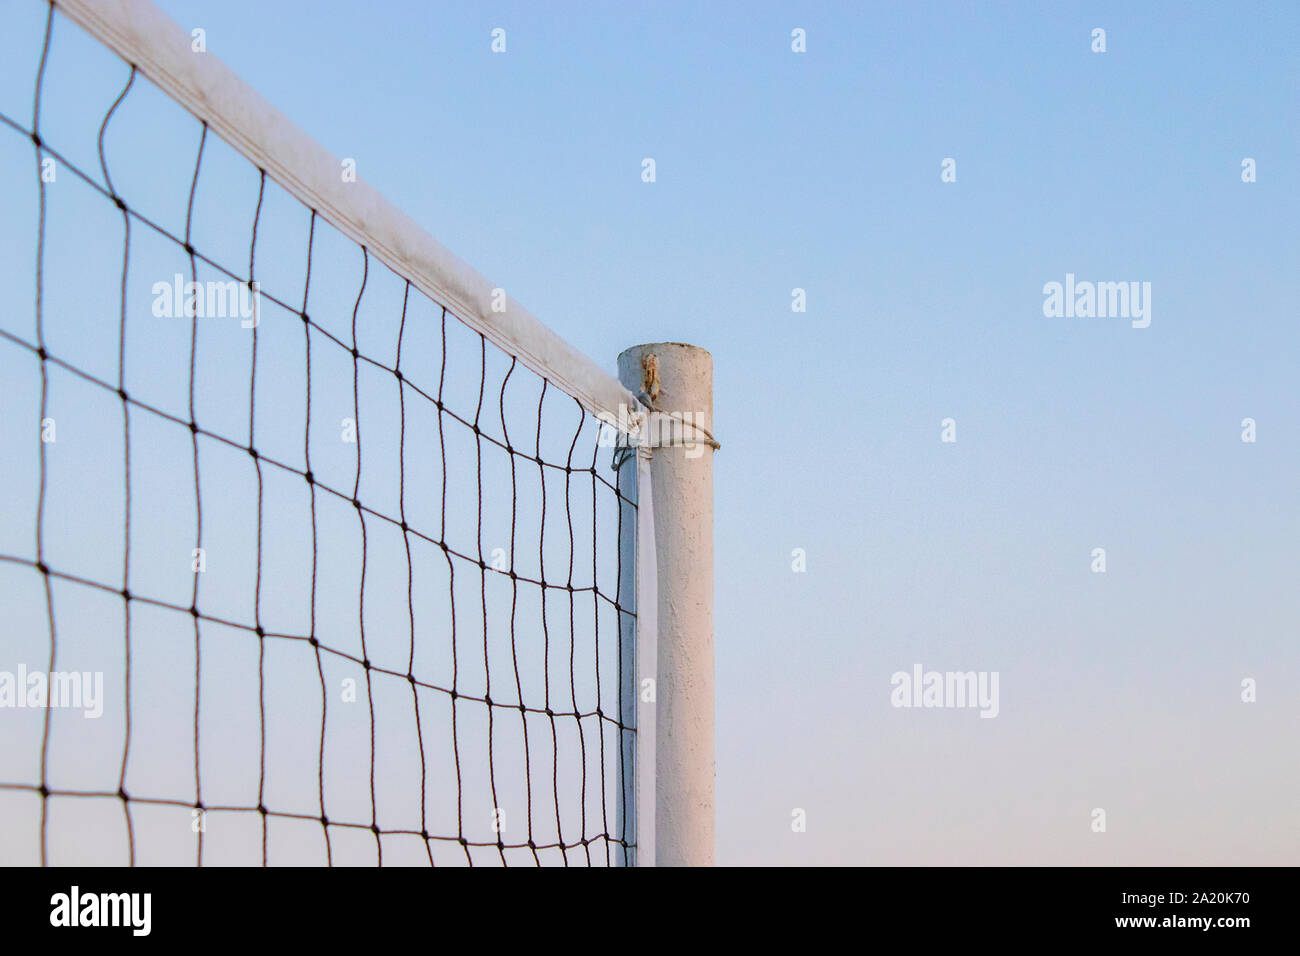 Beach volleyball net, summer vacation, sport concept. isolated sky background. Stock Photo